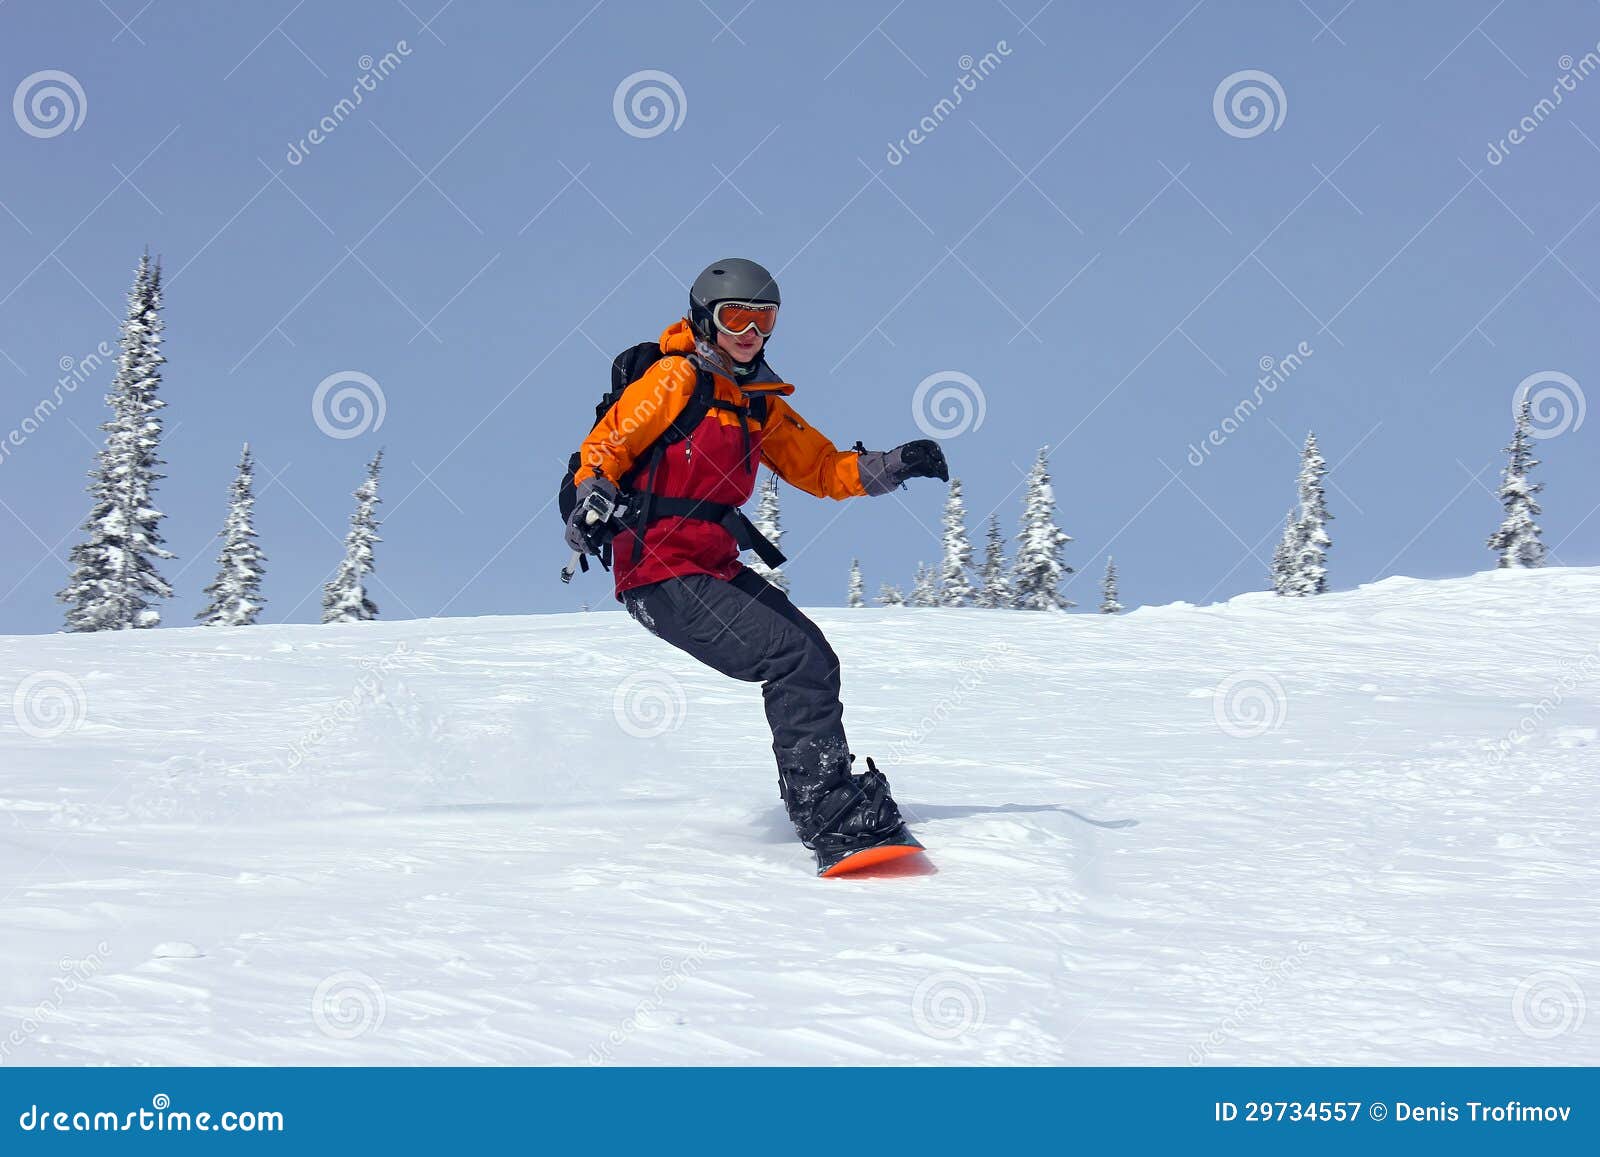 Girl Rushes Down the Slope on a Snowboard Stock Image - Image of energy ...